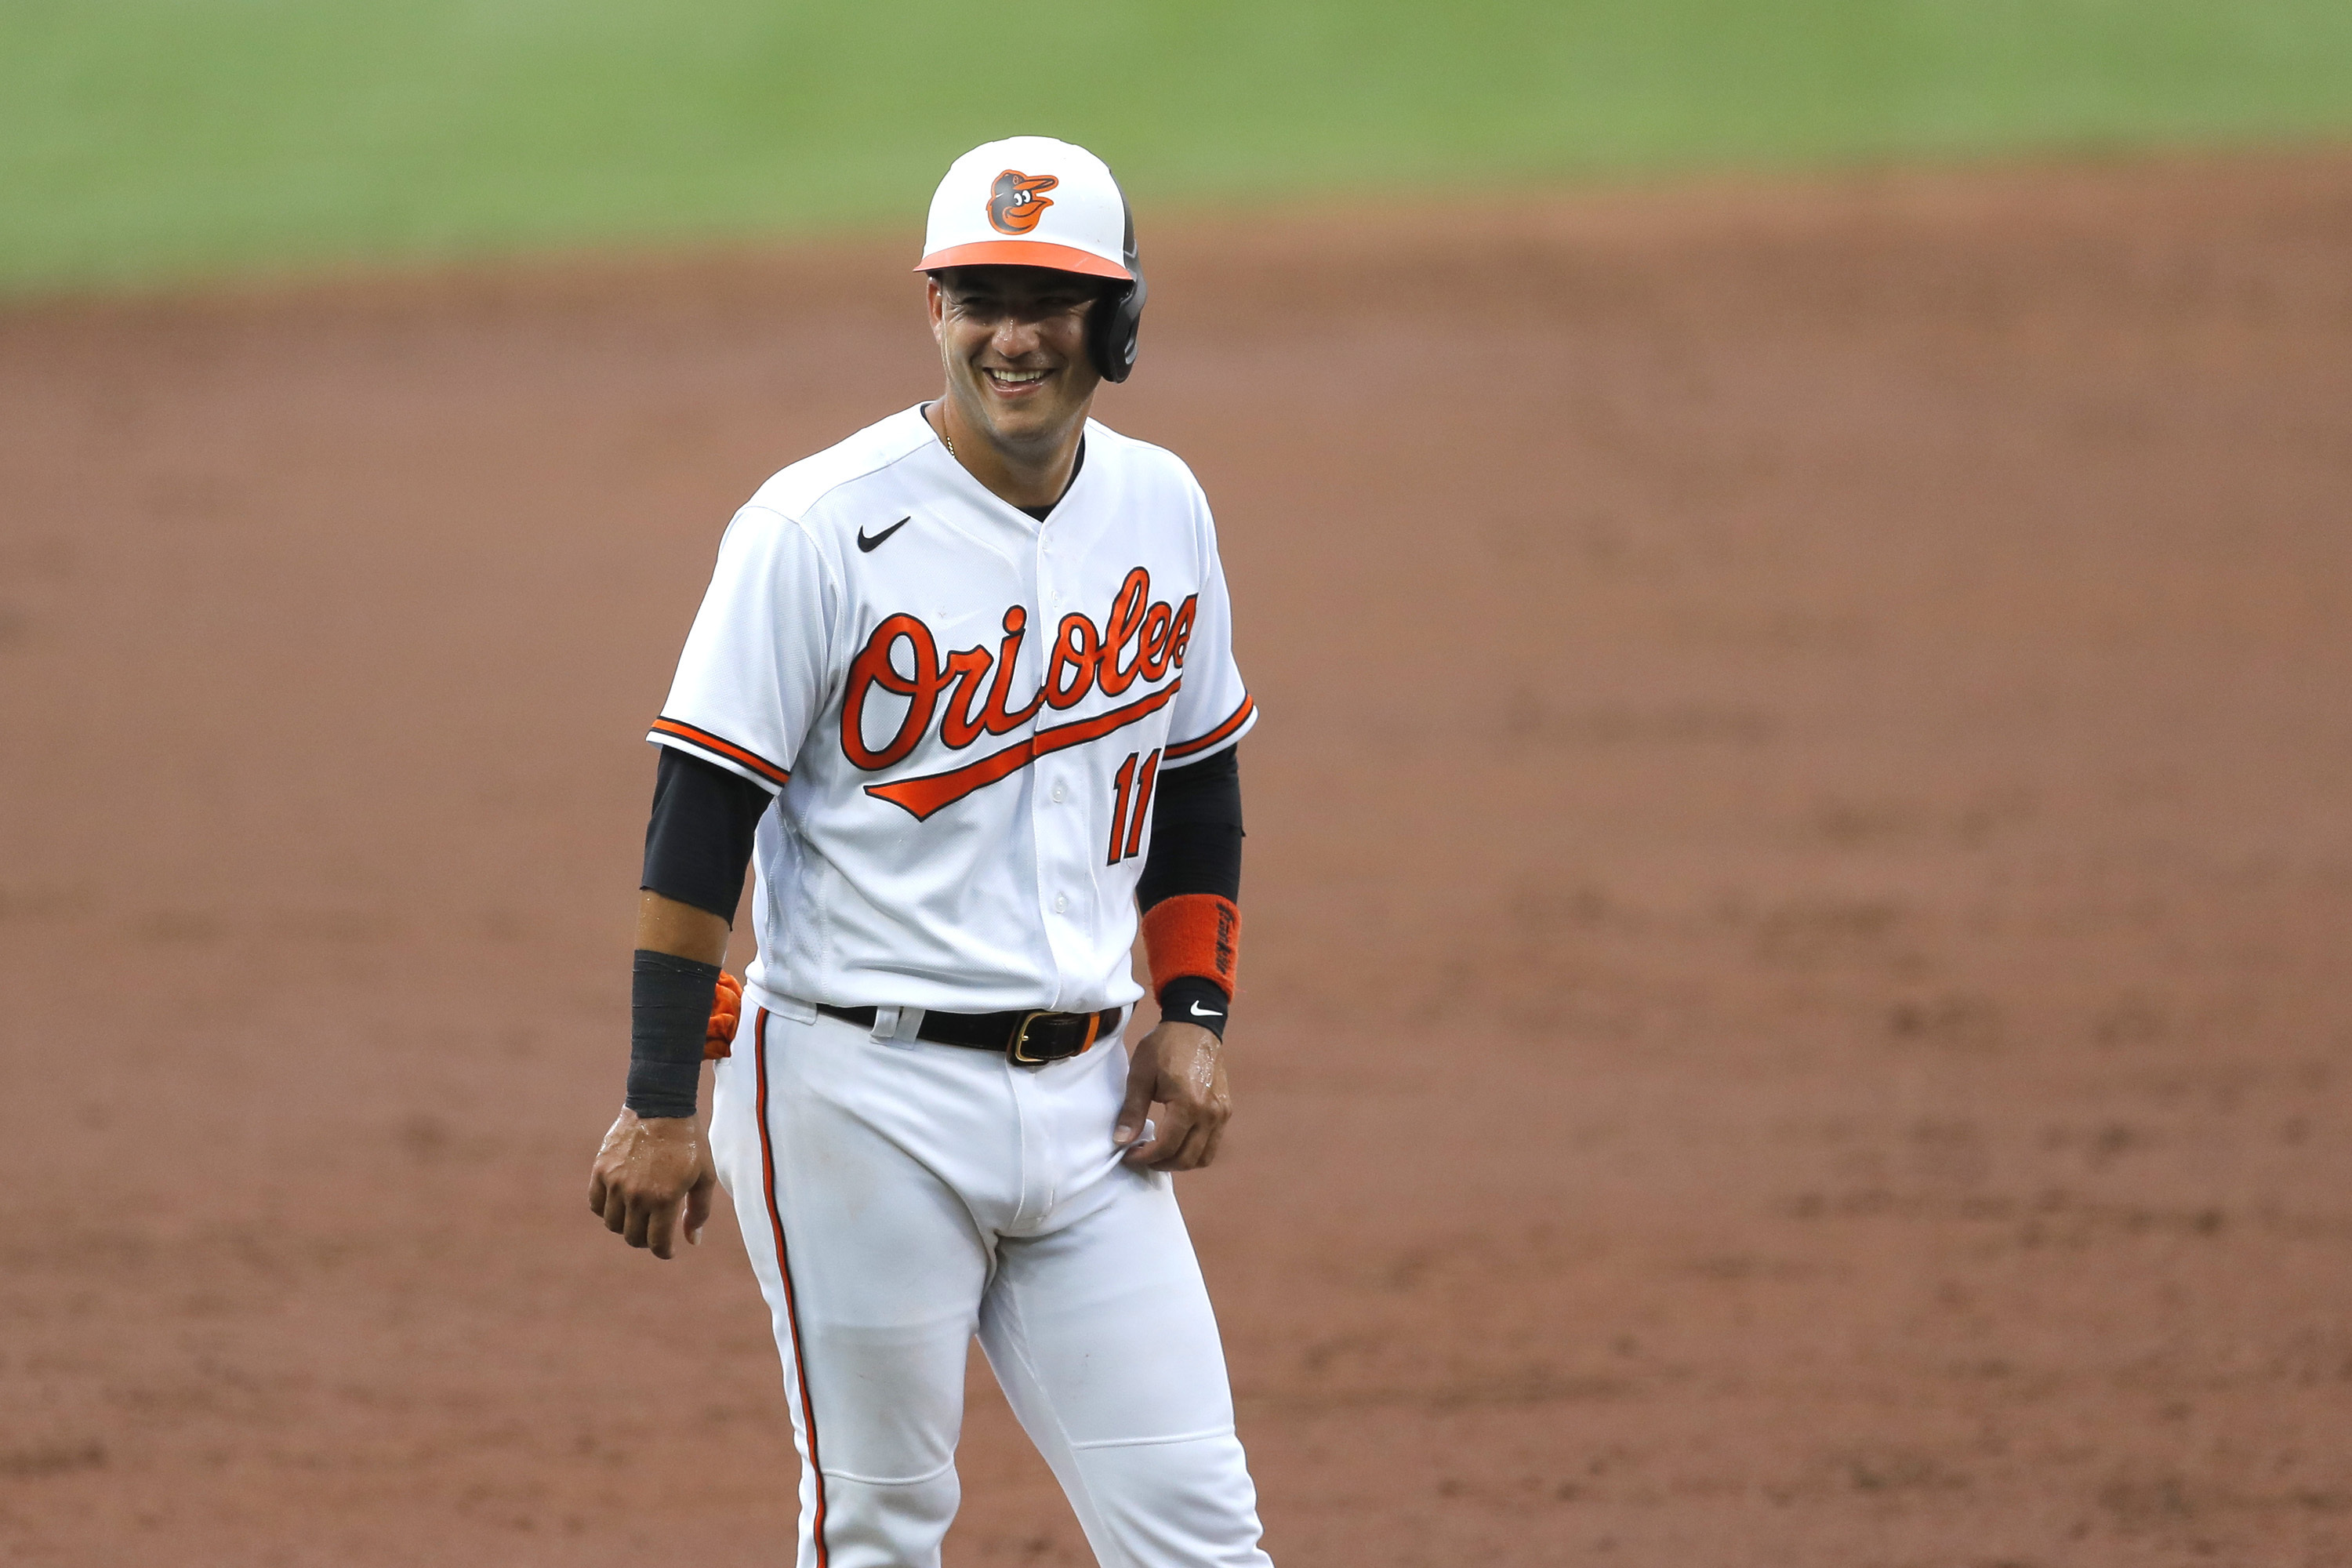 Hobbled by injury, Orioles shortstop Jose Iglesias excelled offensively in  2020 - Camden Chat